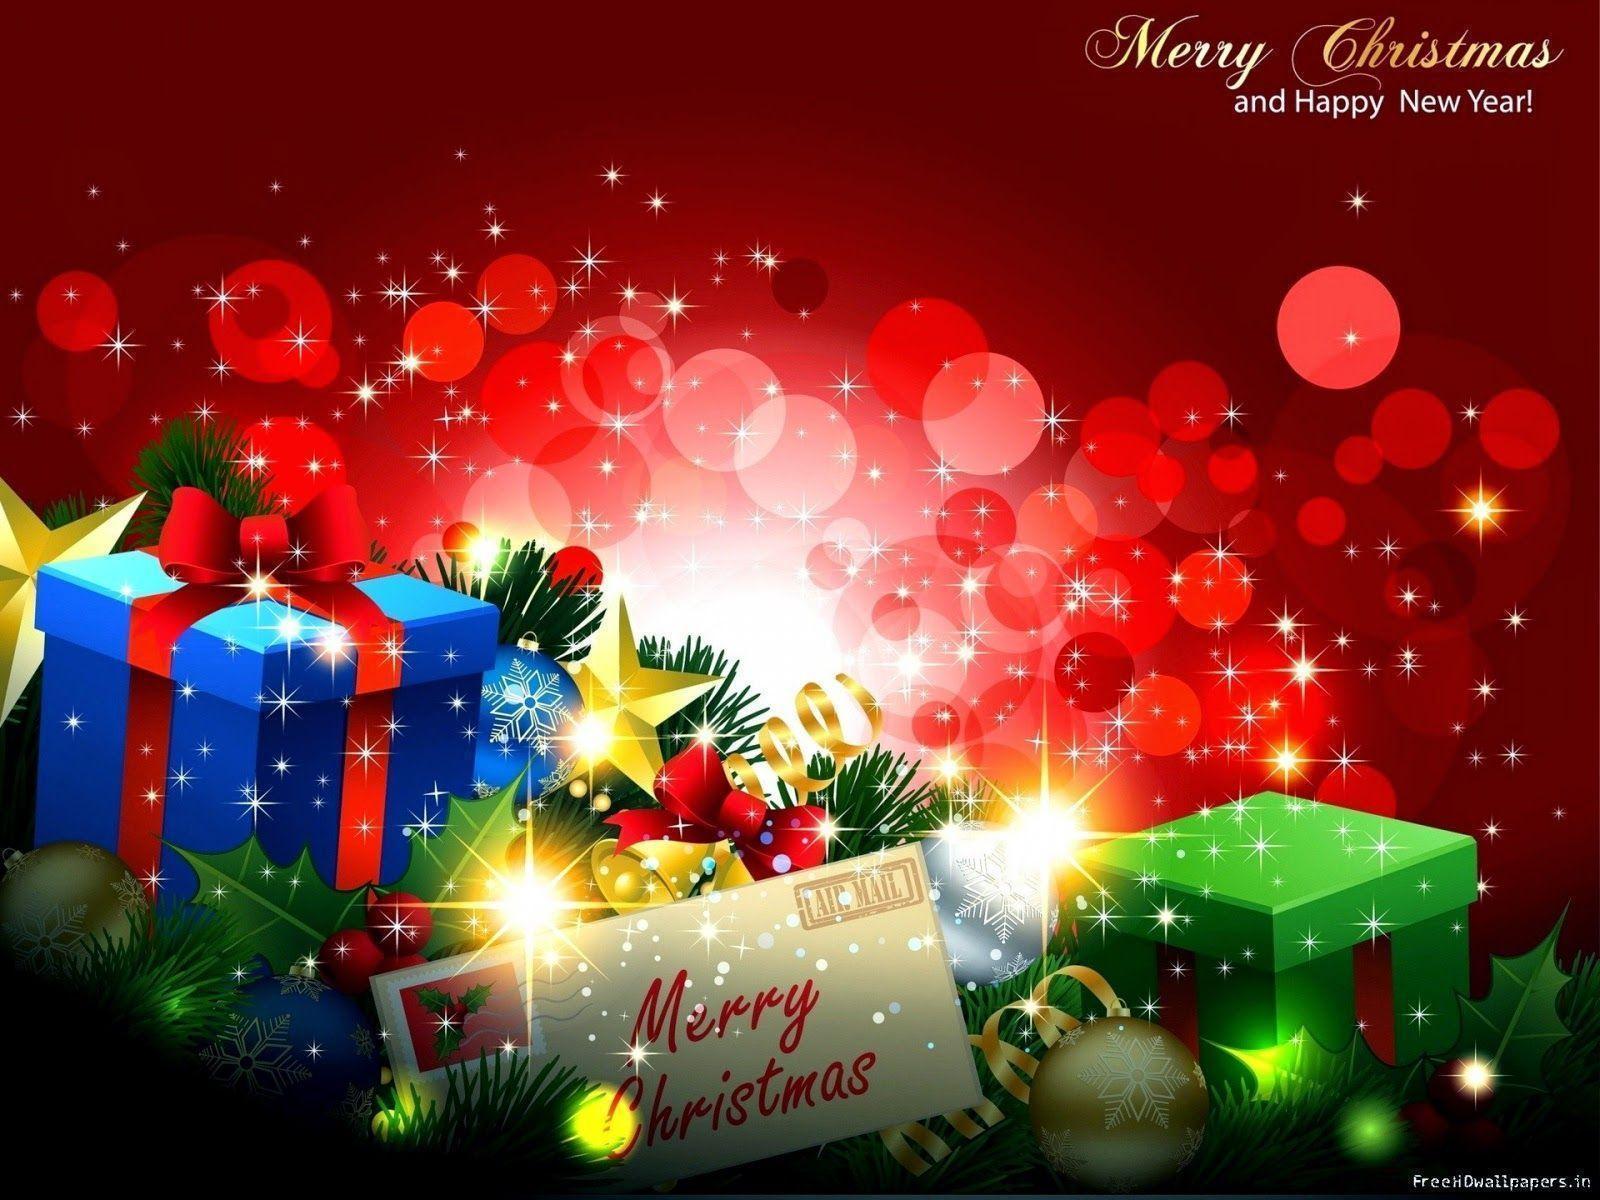 Merry Christmas and Happy New Year 2015 Cards. All Christmas